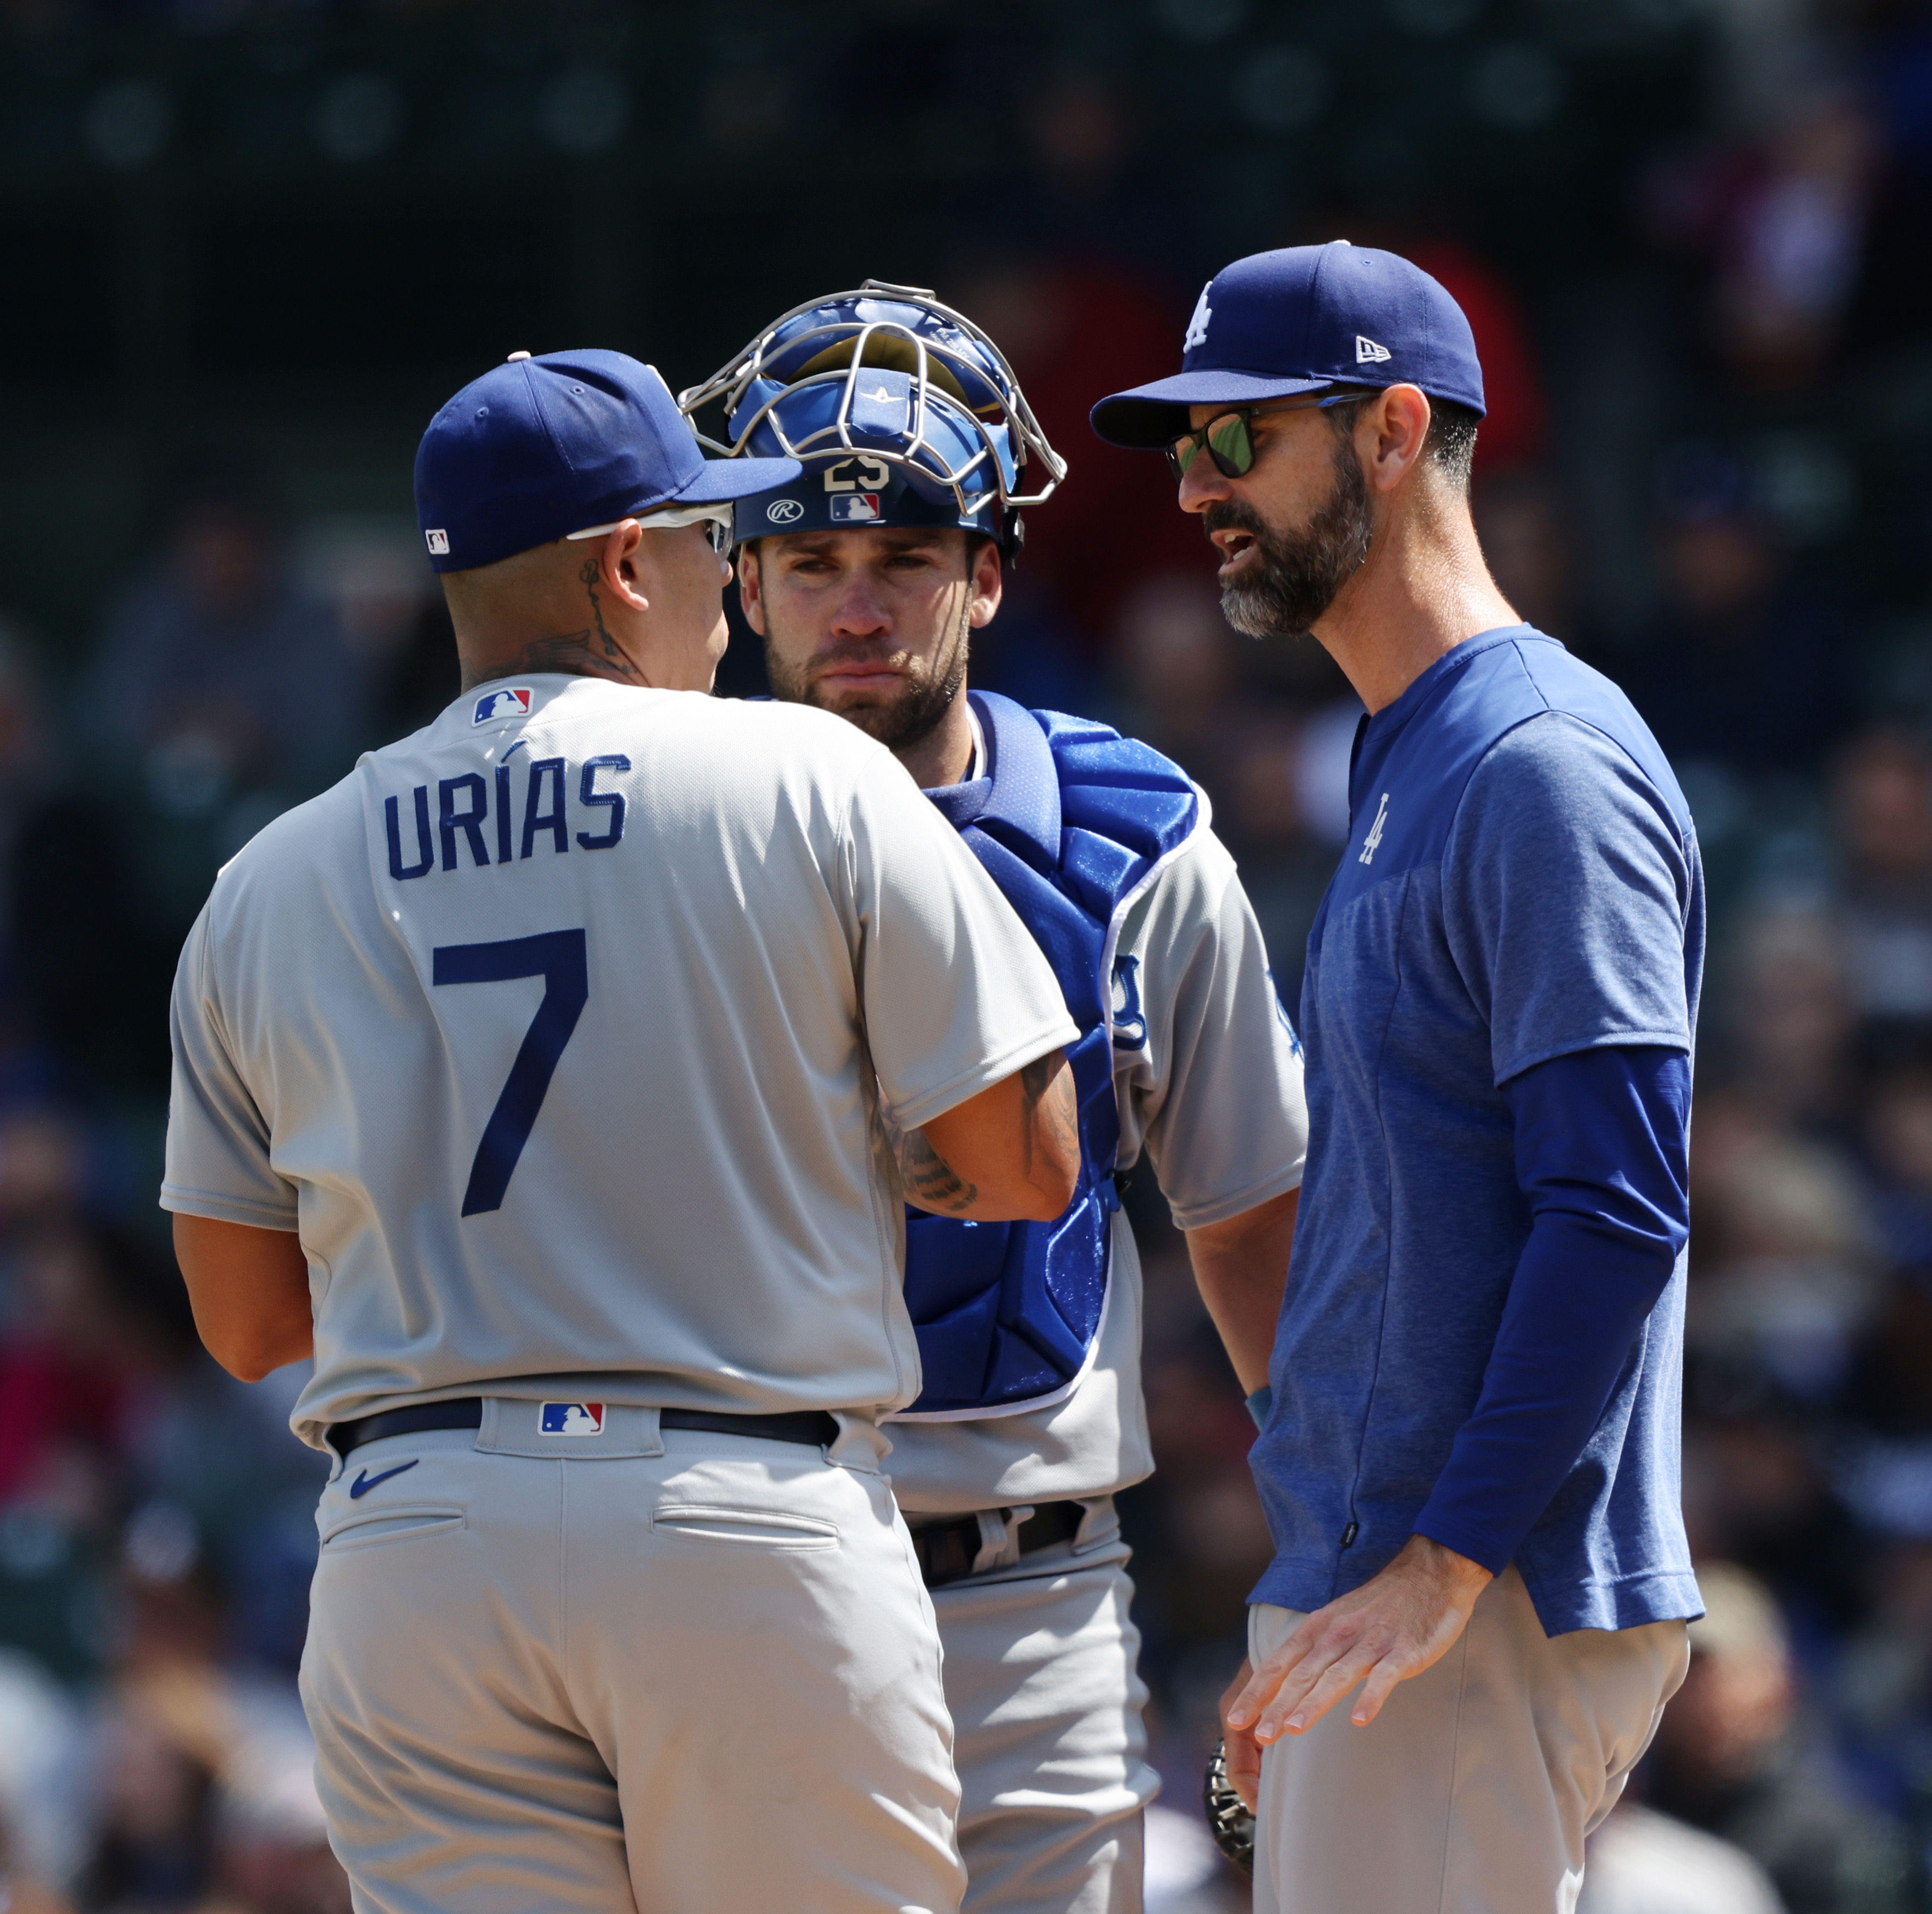 MLB roundup: Cubs' Drew Smyly flirts with perfection vs. Dodgers